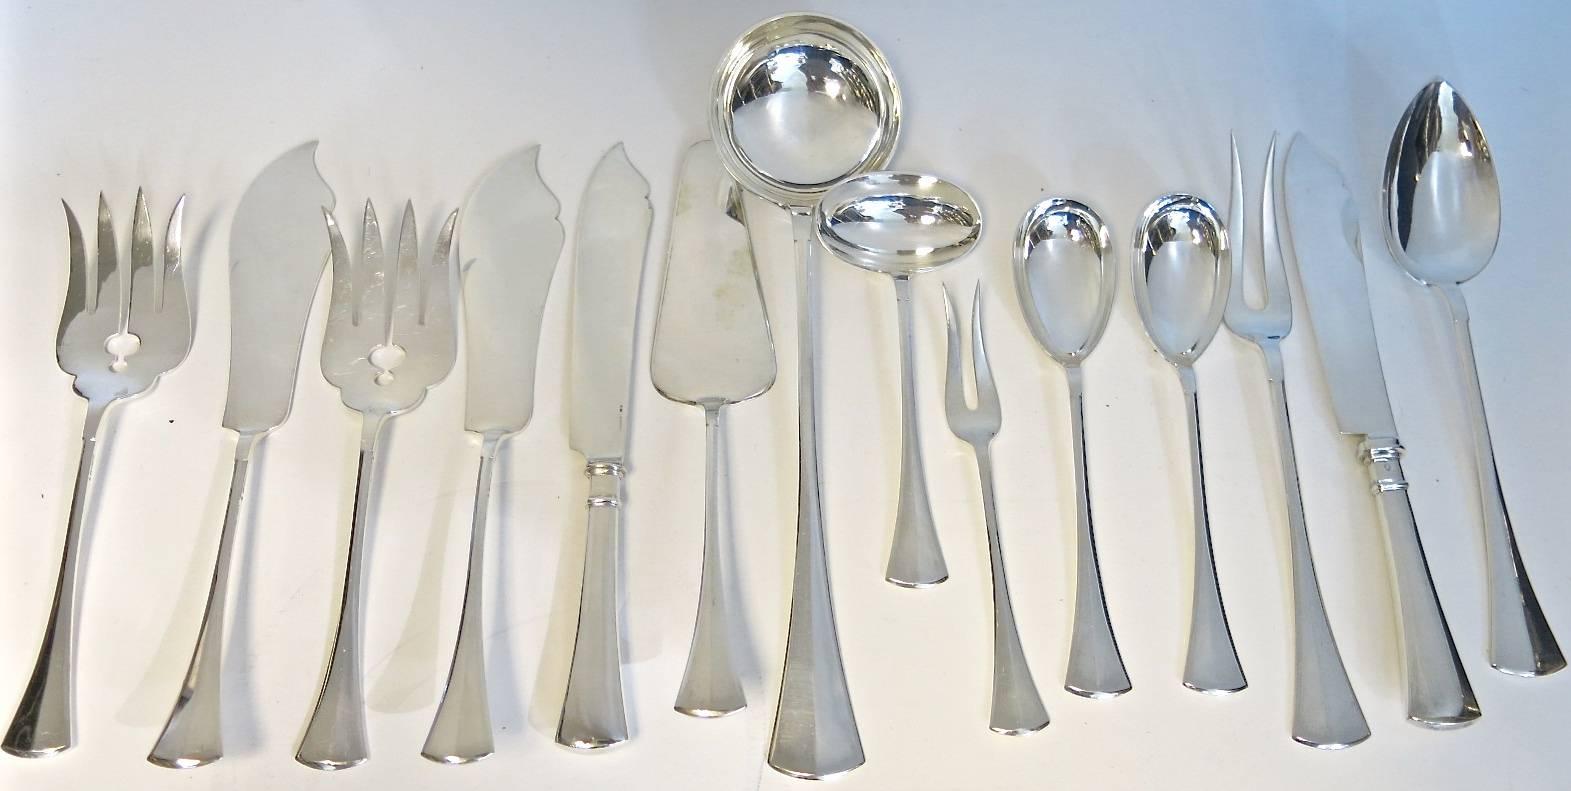 A very large & comprehensive flatware set, complete for 18 people with a selection of 14 serving pieces. Retailed by Antal Bachruch, Budapest, Circa 1920's. Bachruch was an important silver & jewelry retailer at the turn of the 19th/20th